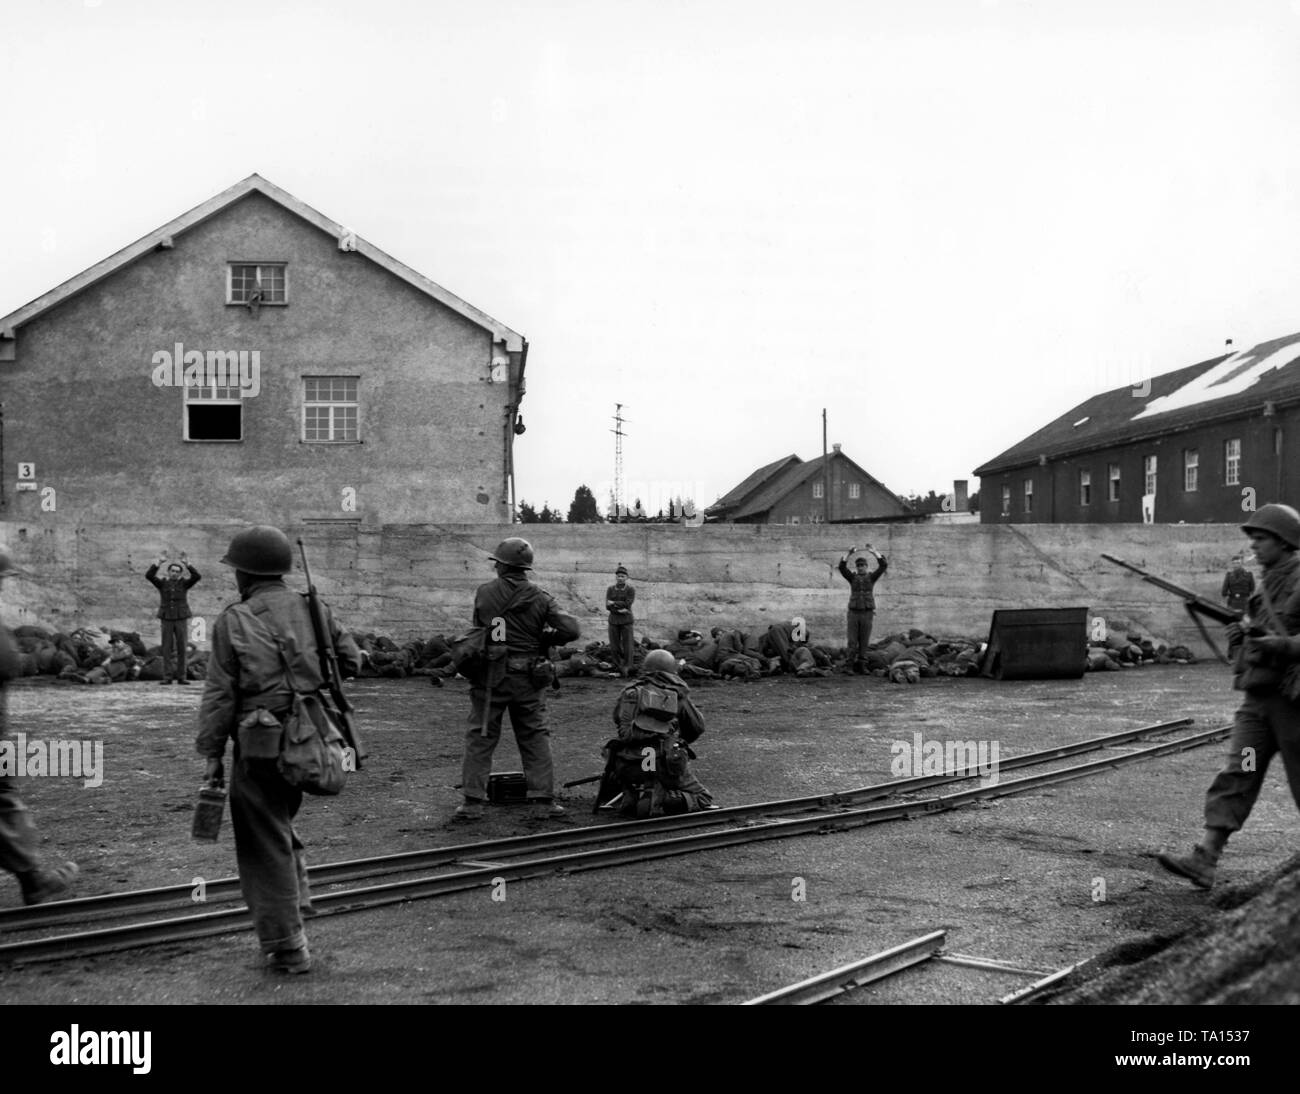 Soldiers of the 157th Infantry Regiment of the US Army are targeting SS men, who are lined up along a wall. According to the original caption, the SS men lying on the ground try to pretend to be dead after the Americans opened fire on a fleeing guard. In a spontaneous revenge action between 39 and 50 guards were shot and this photo shows probably the moment before the execution. Stock Photo